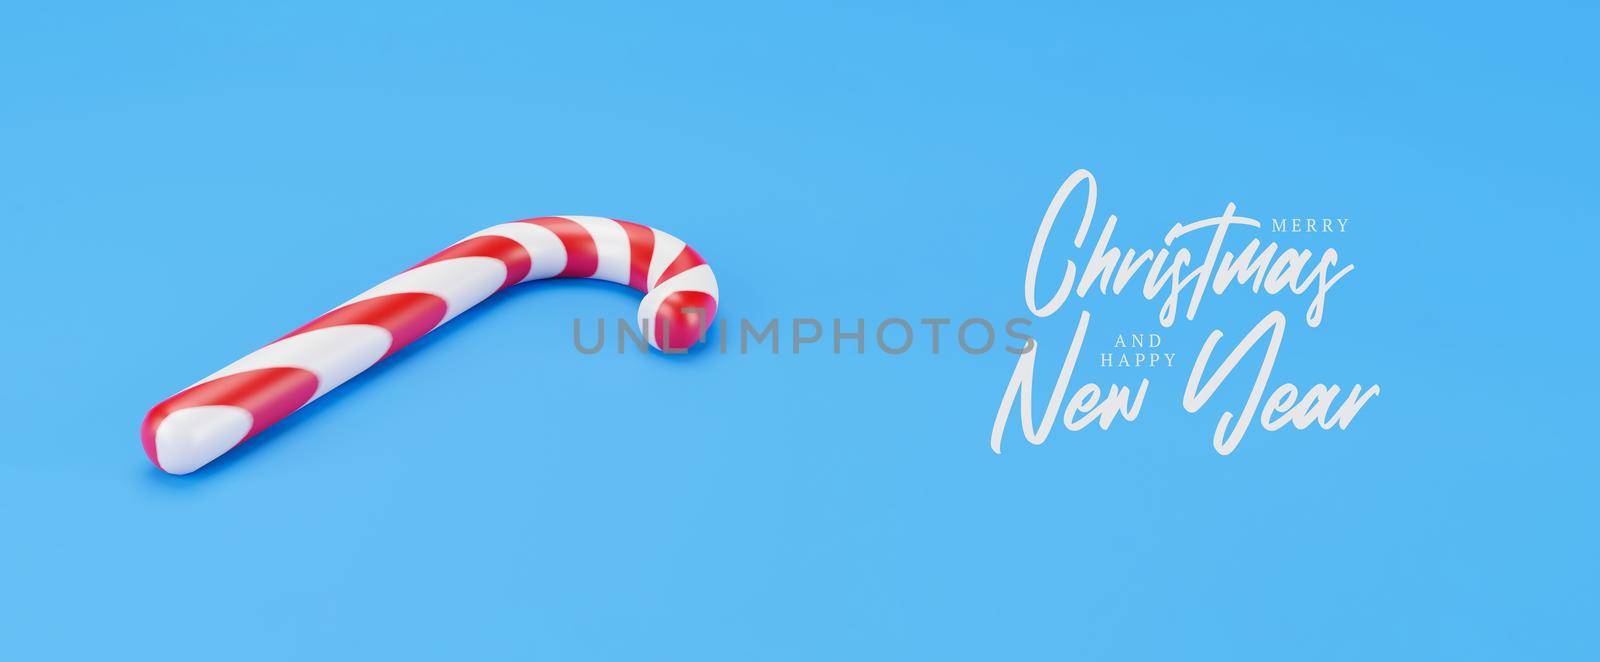 Merry Christmas canes, lollipop mint candy with red stripes on blue background. New Years celebration concept. Traditional sweet dessert. 3d render